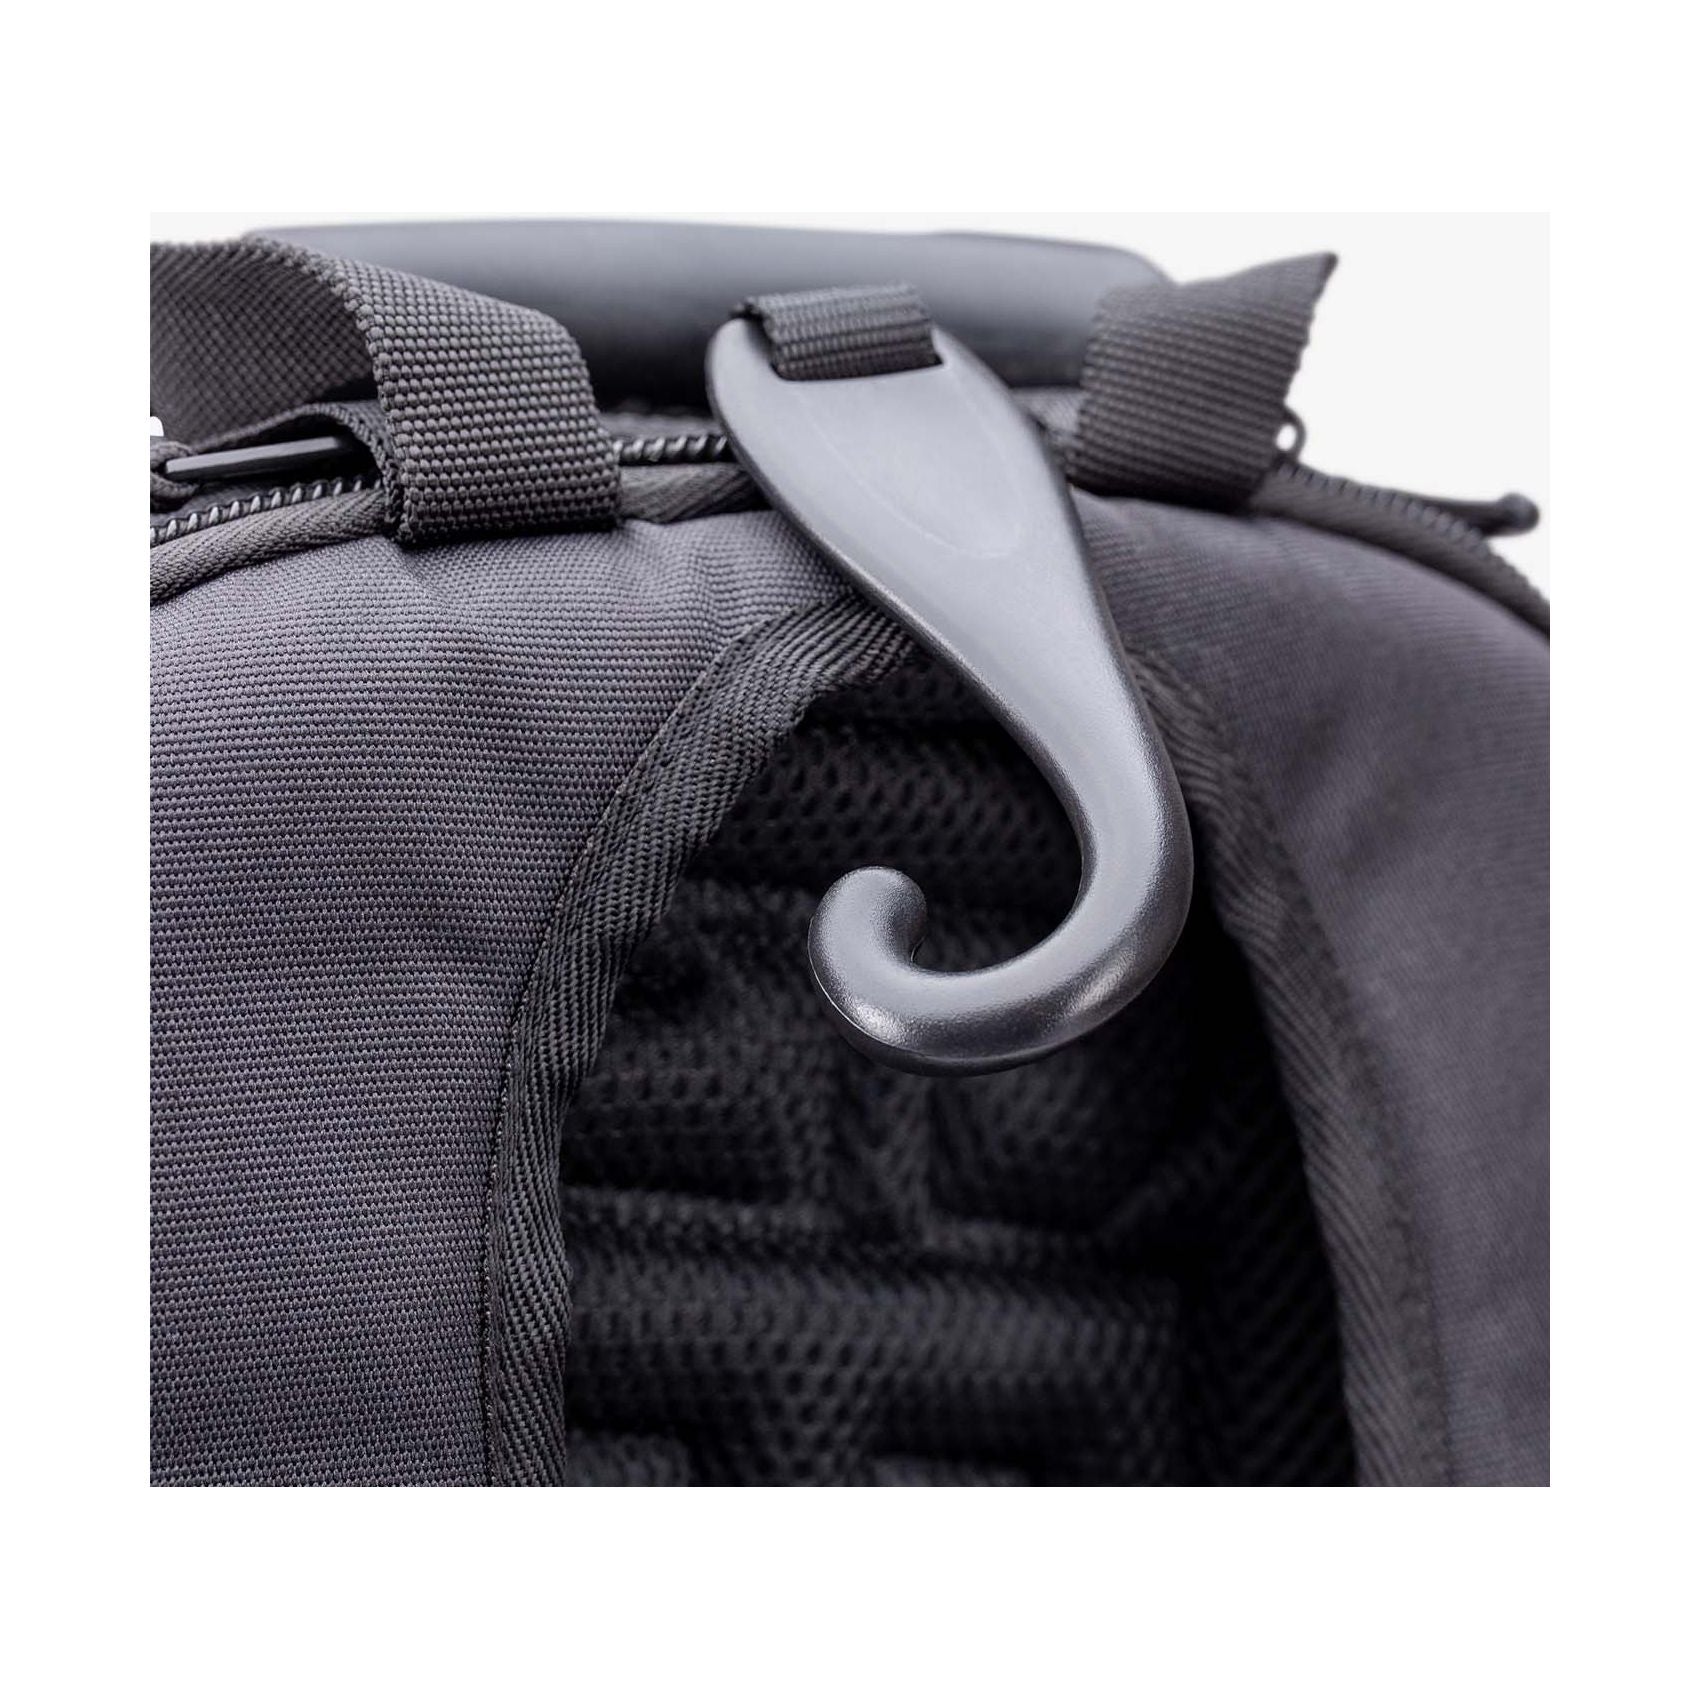 CORE COLLECTION BACKPACK - Grip On Golf & Pickleball Zone